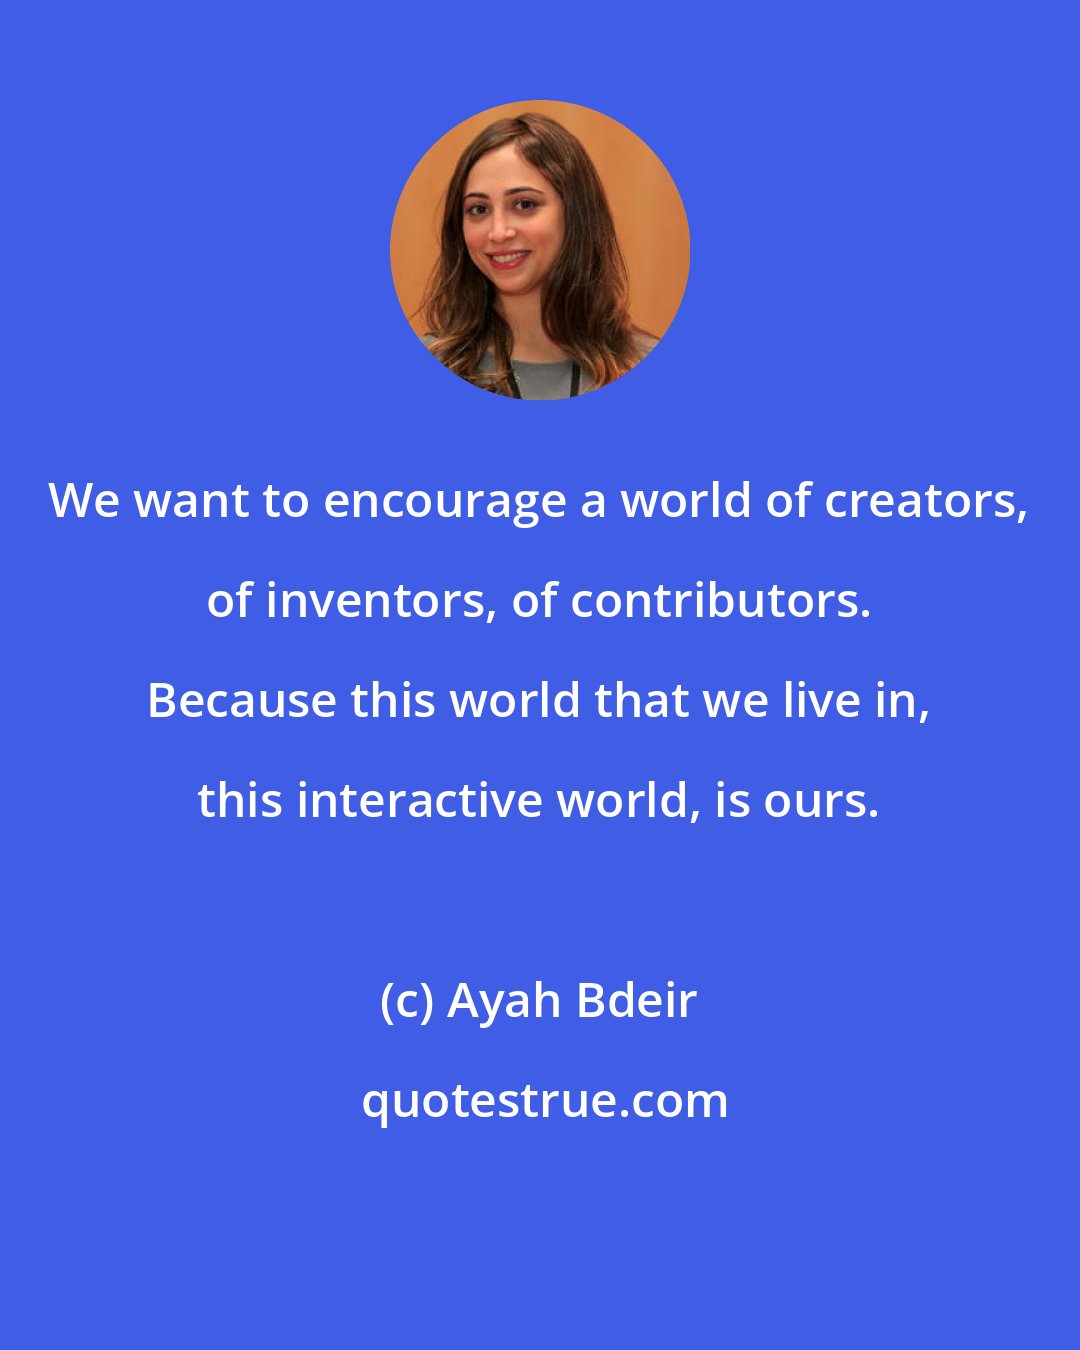 Ayah Bdeir: We want to encourage a world of creators, of inventors, of contributors. Because this world that we live in, this interactive world, is ours.